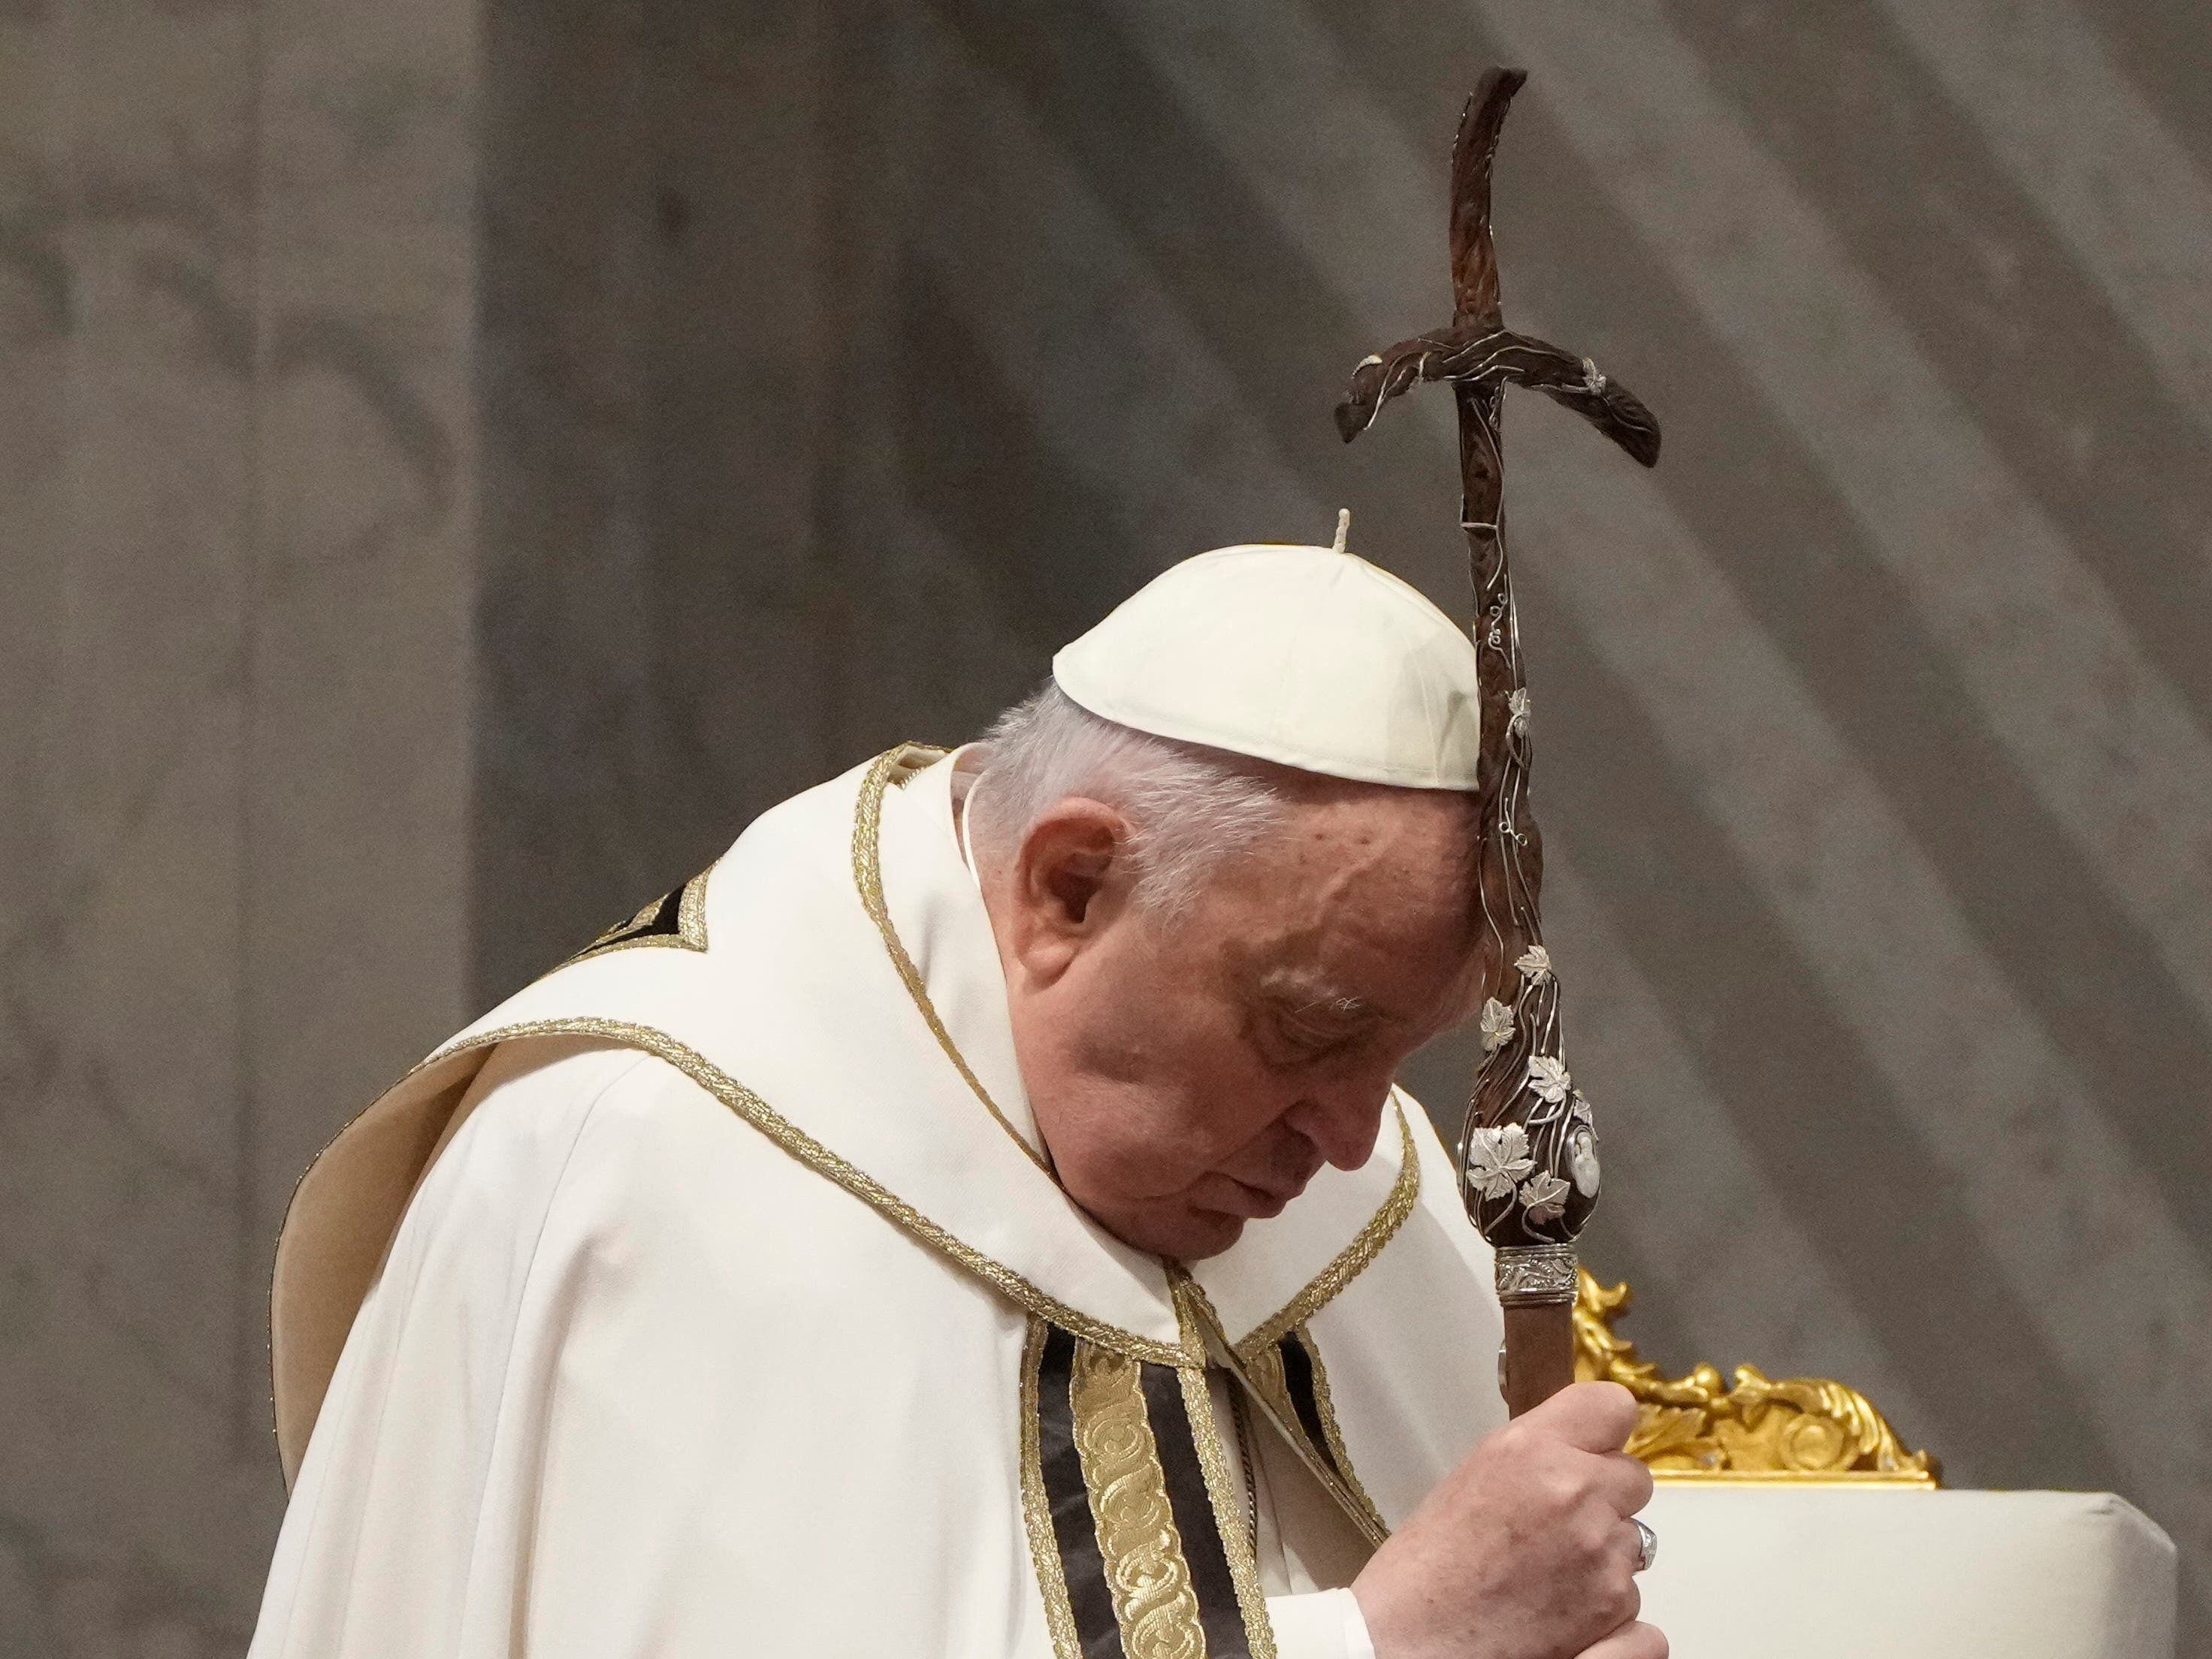 Pope urges priests to avoid ‘clerical hypocrisy’ in Maundy Thursday speech